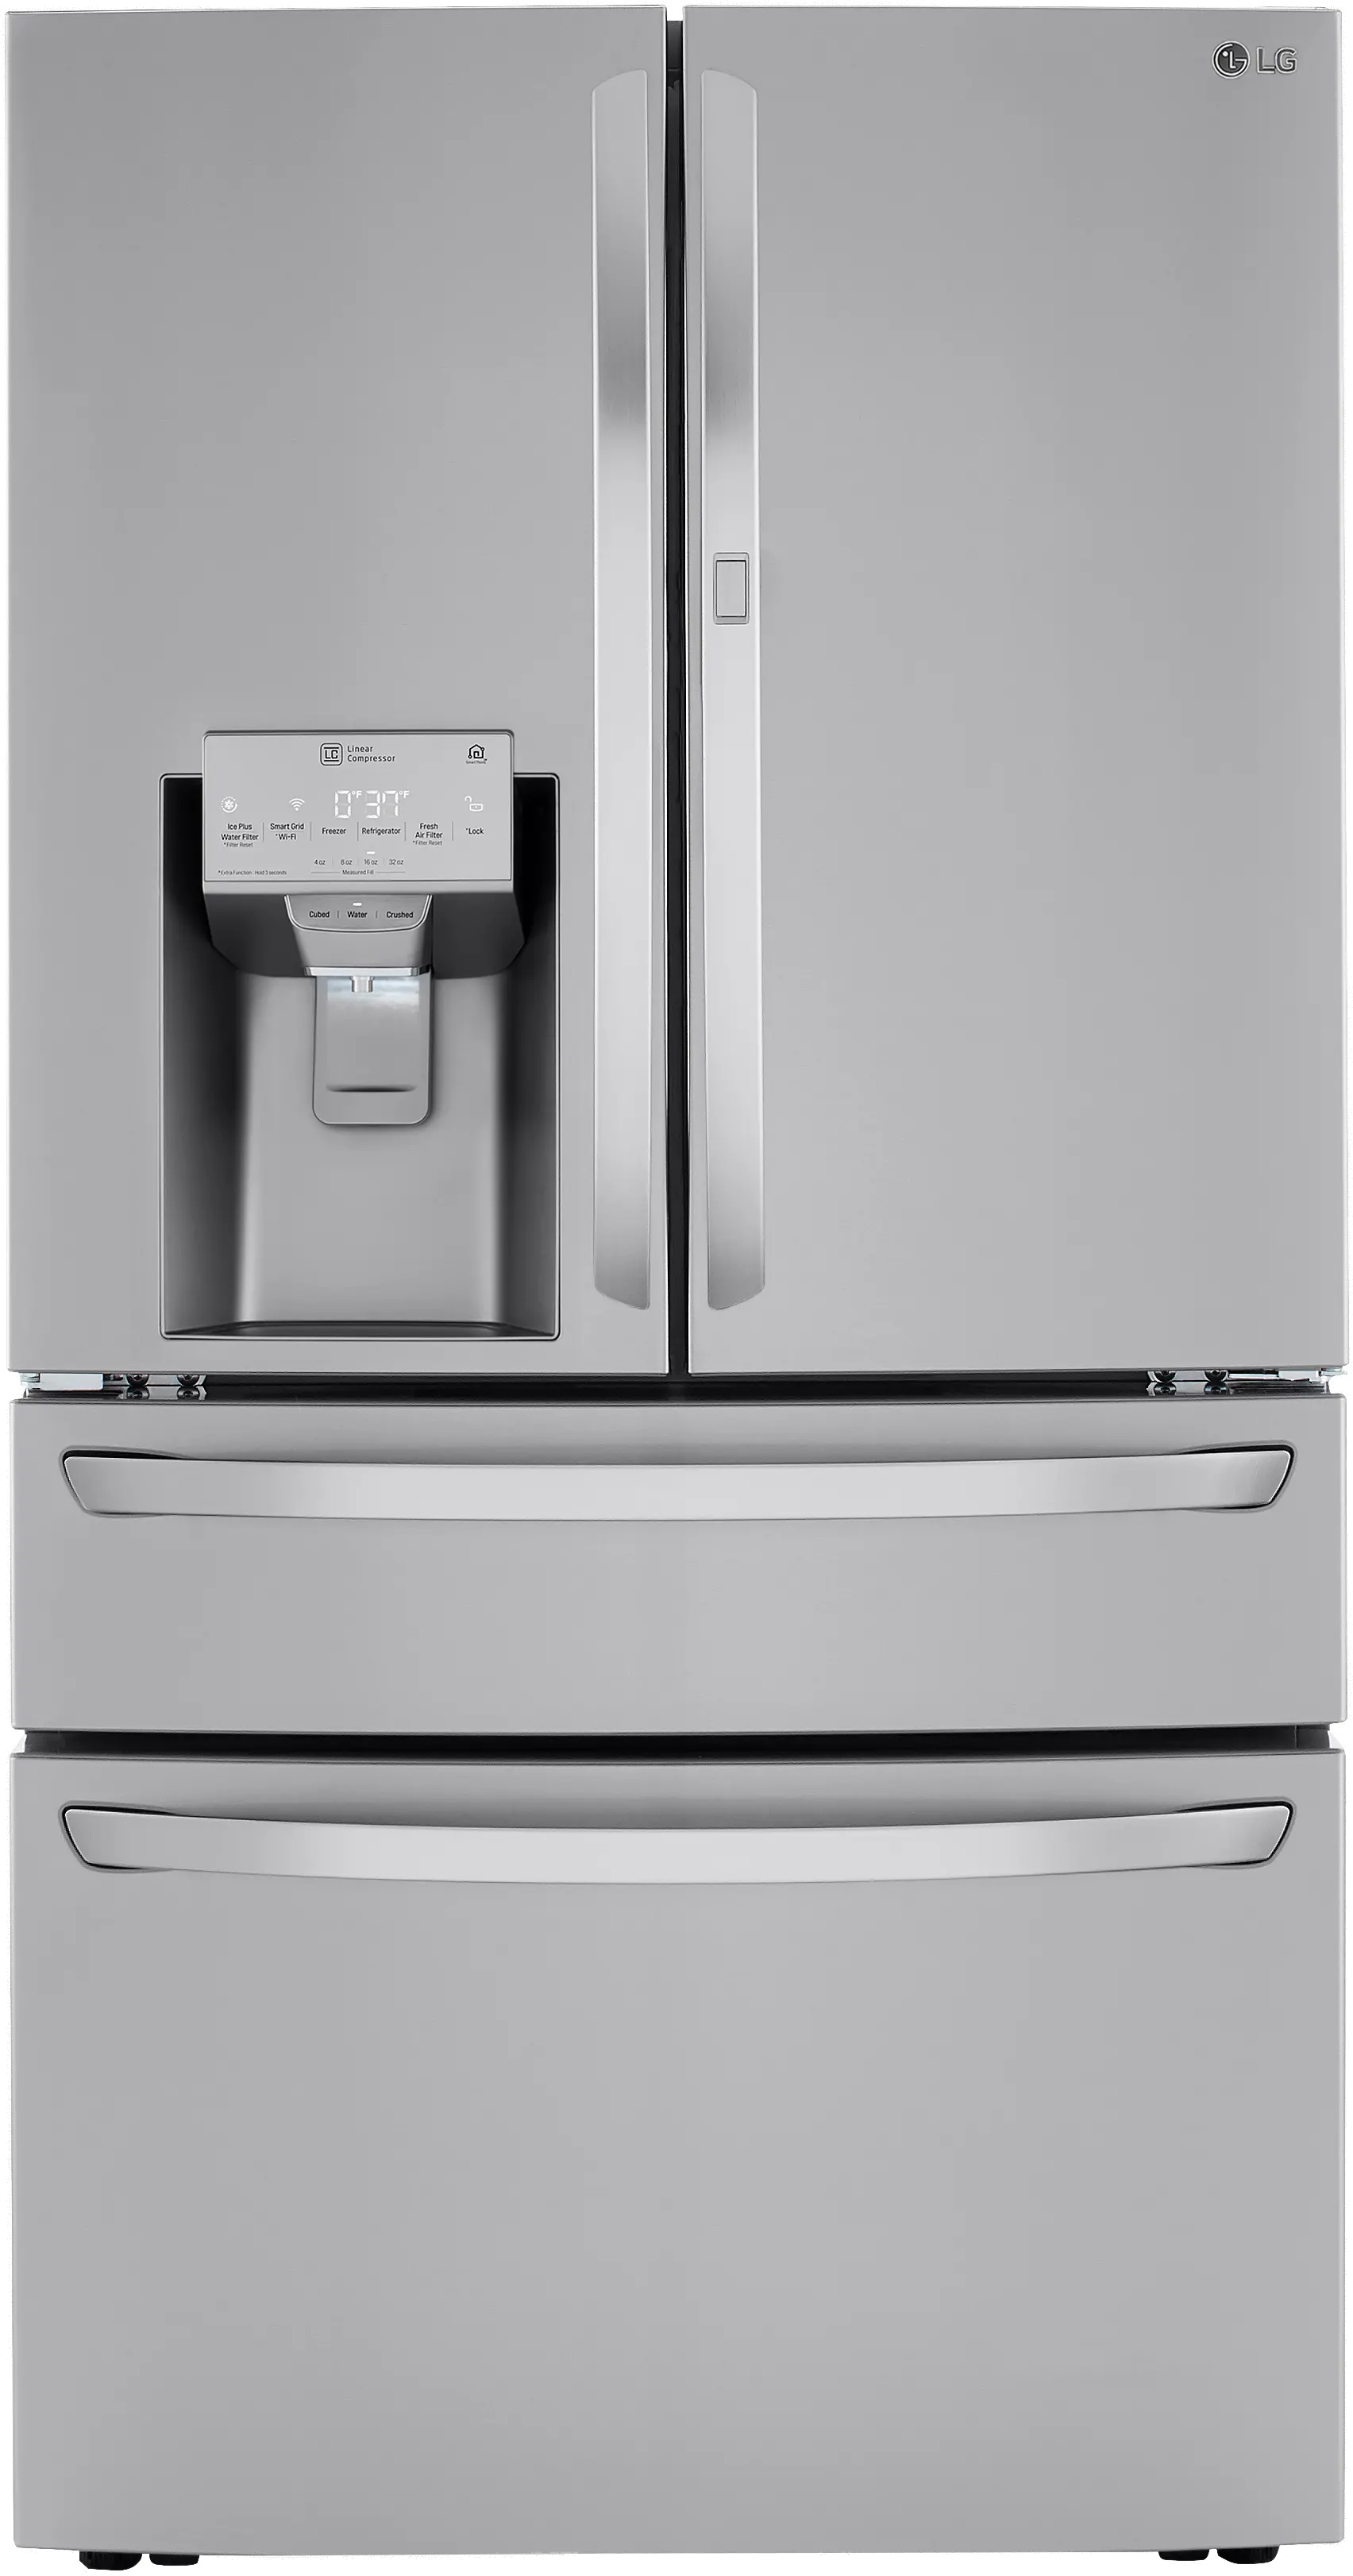 Let's hope resetting my LG craft ice maker will fix it : r/appliancerepair